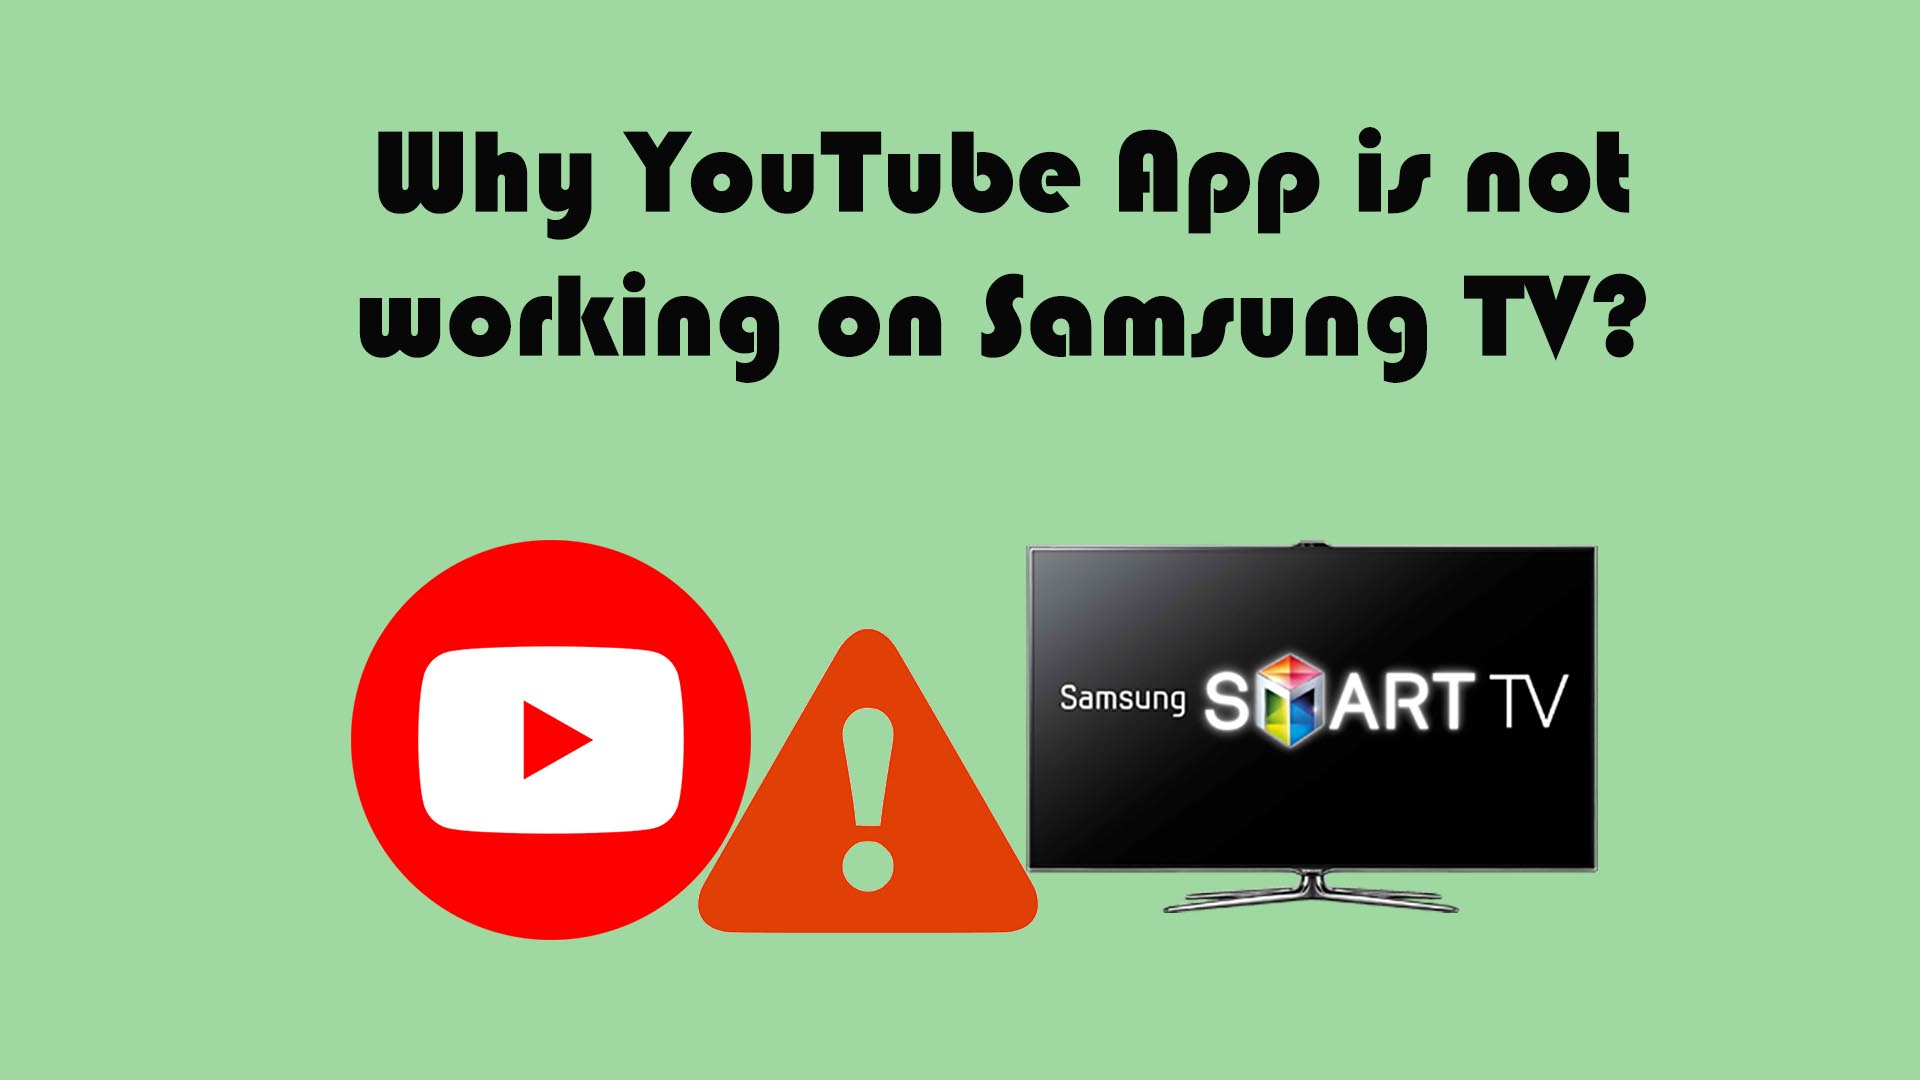 Reasons & Fixes for YouTube App Not Working on Samsung TV